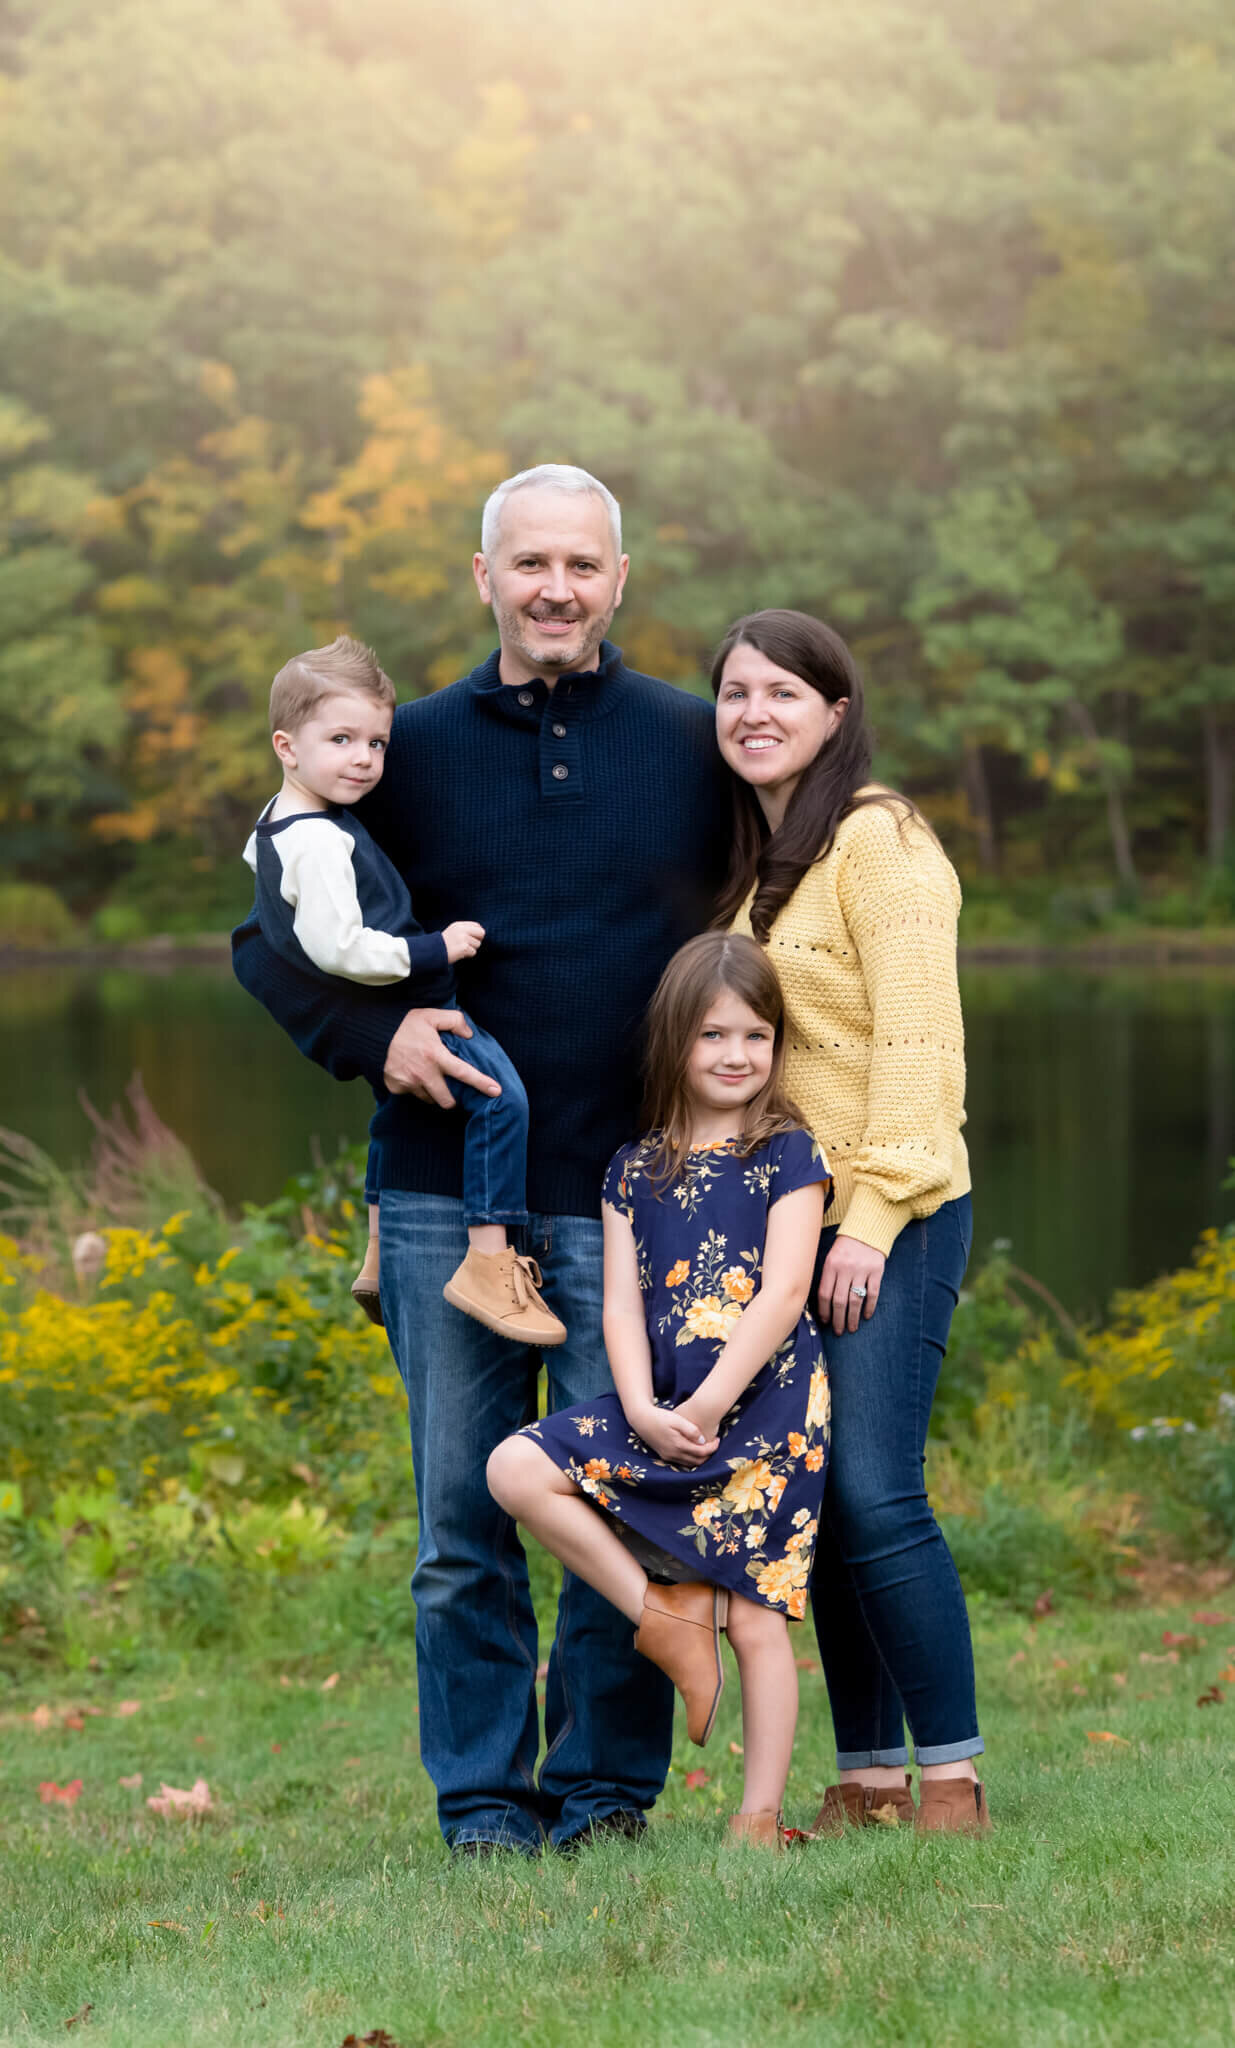 Boston family wearing navy tans and yellows for fall photos in front of water